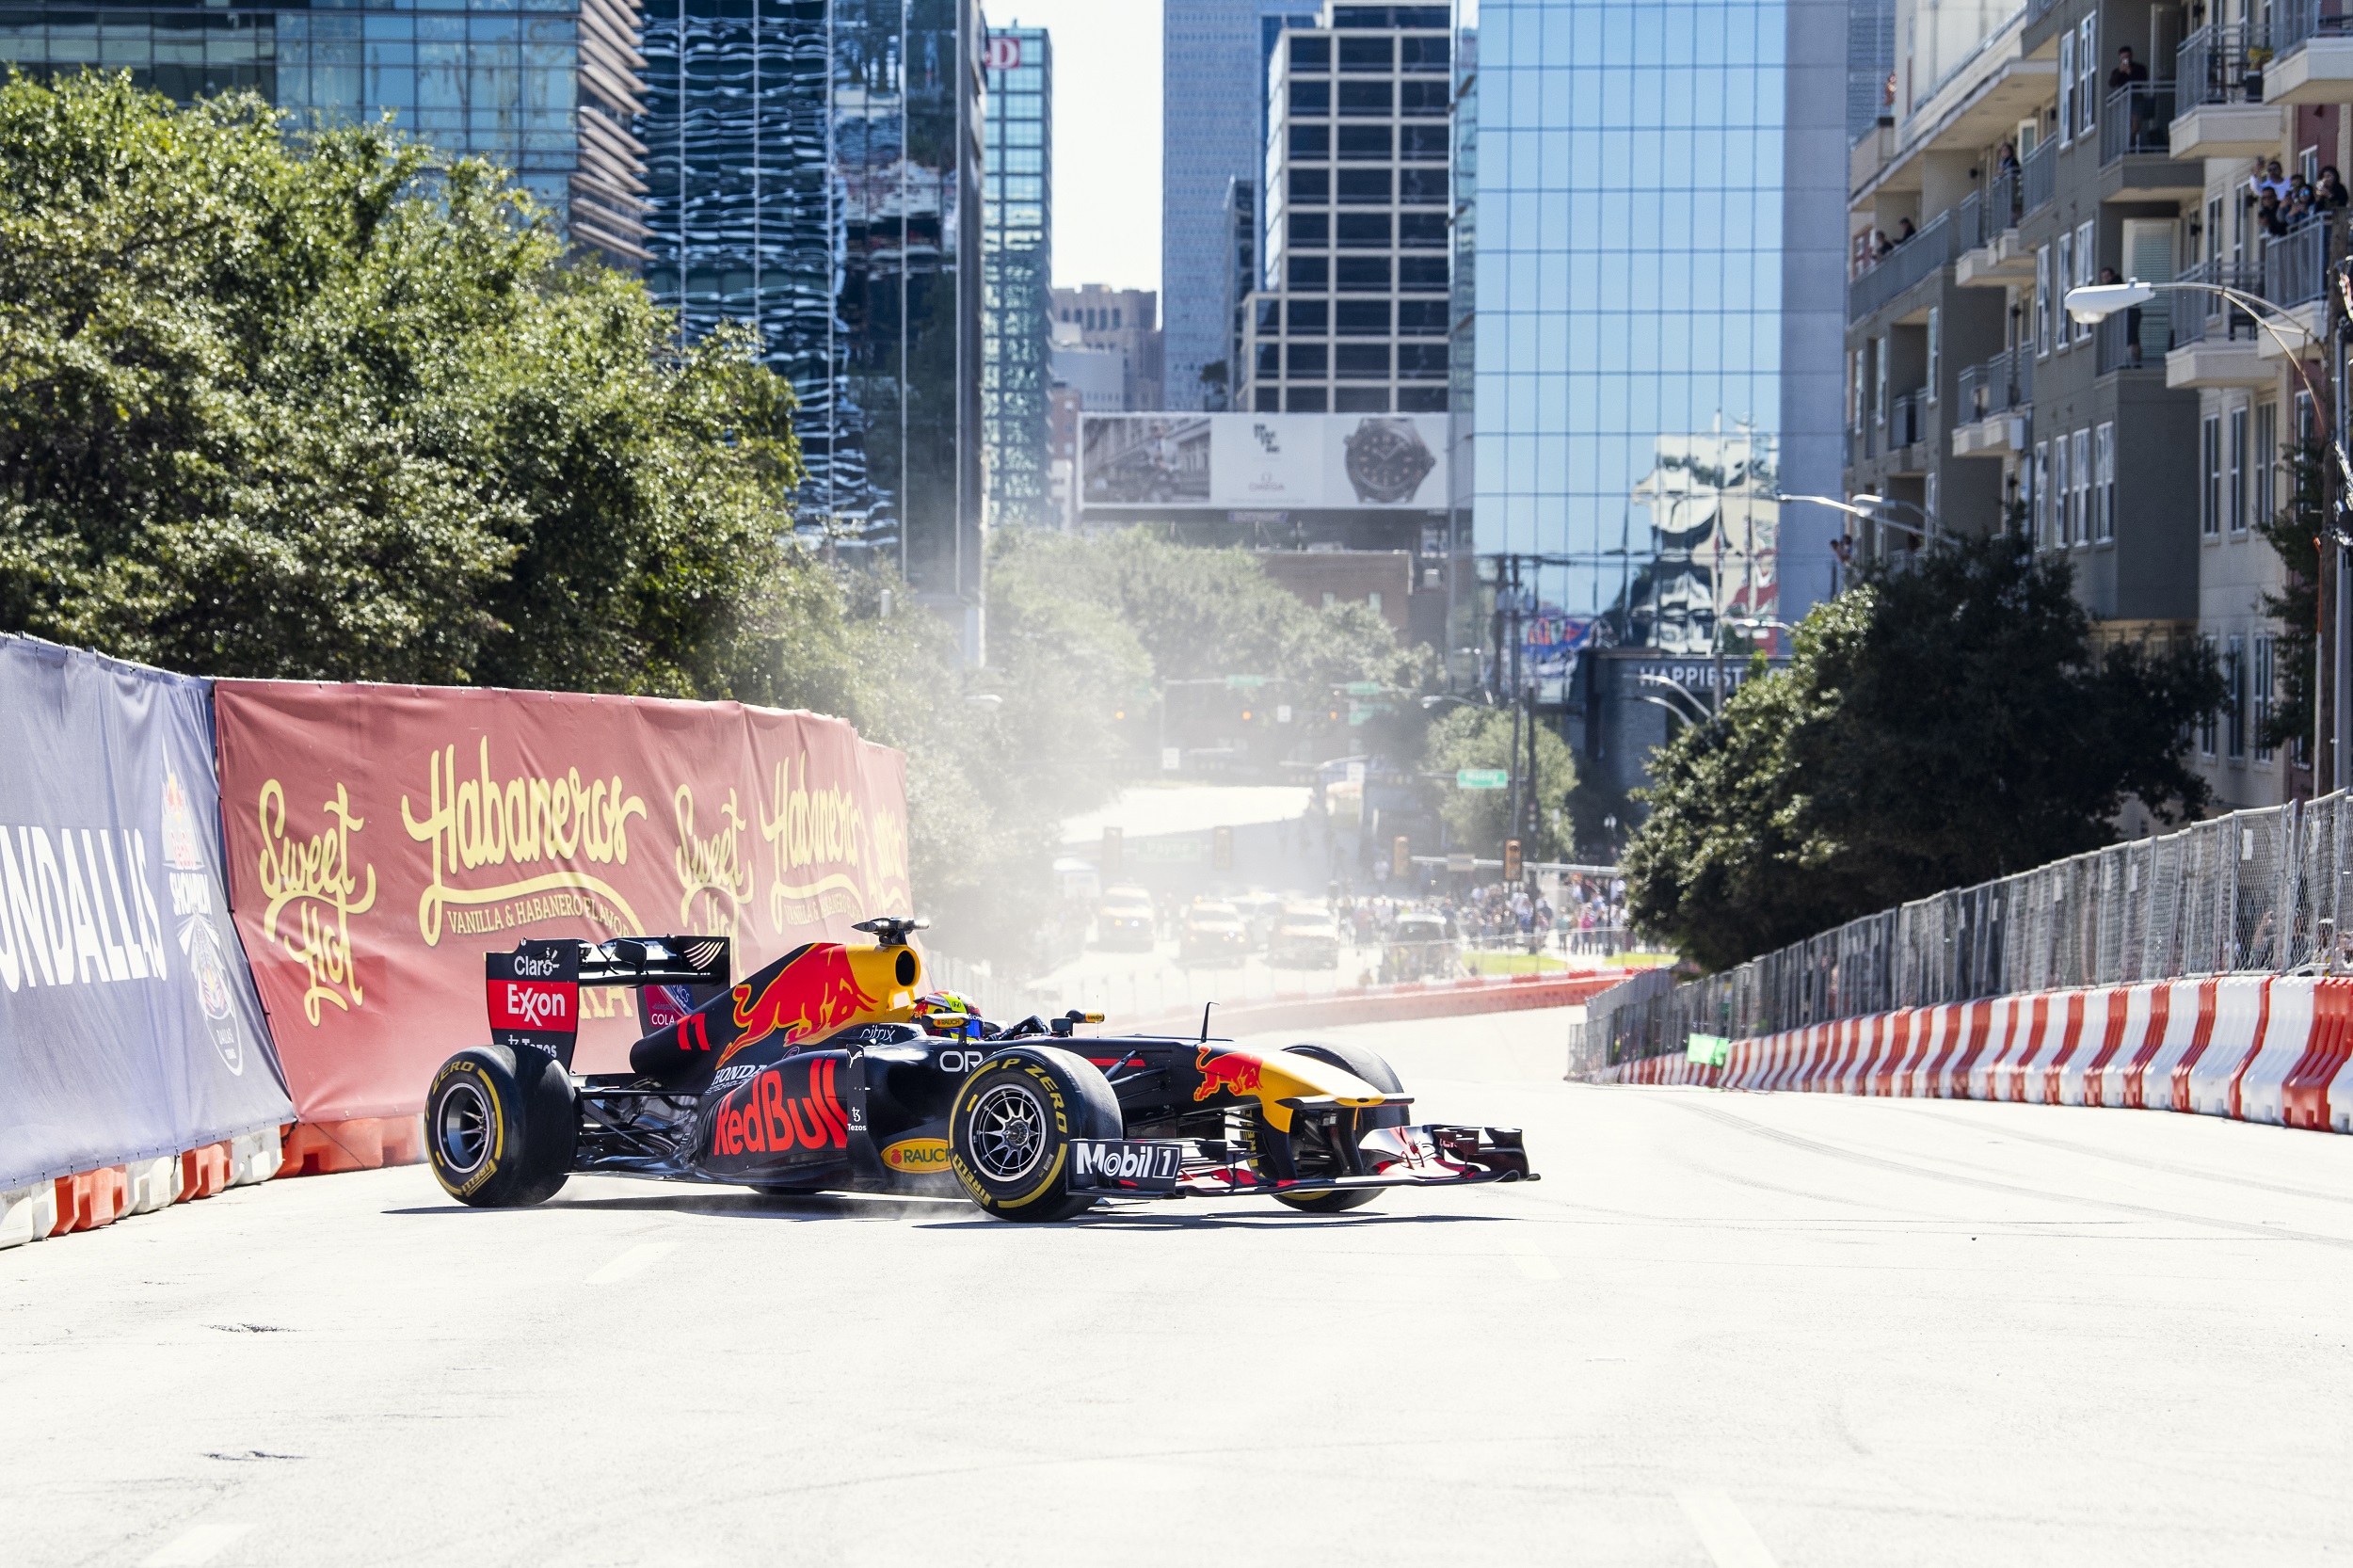 Sergio “Checo” Perez drives the RB7 car at Red Bull Show Run in Dallas, Texas, USA on 16 October, 2021.